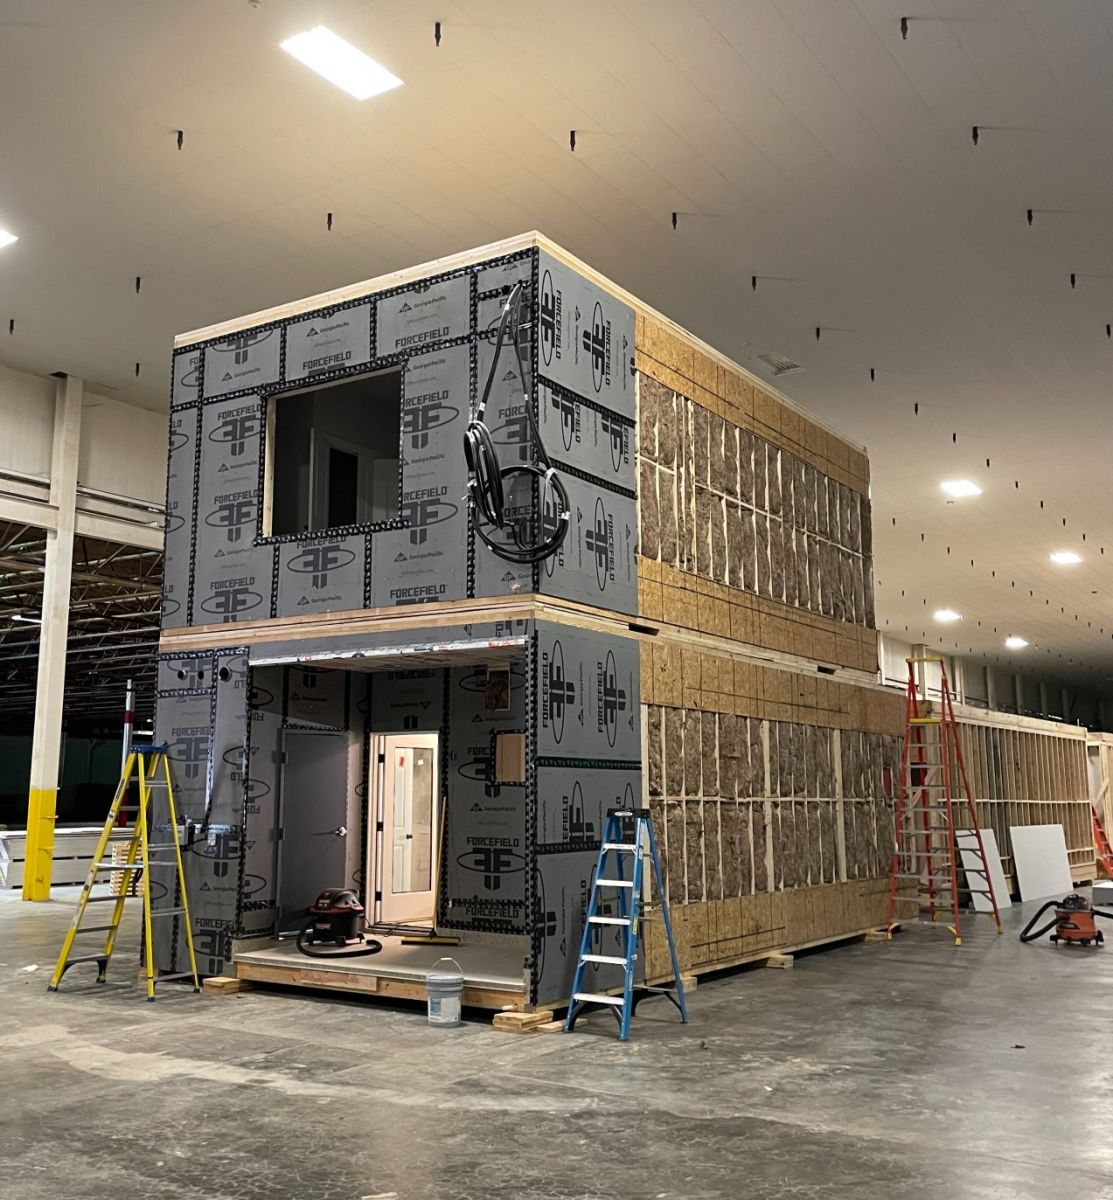 Bmarko has already begun to assemble apartment modules in the Greenville warehouse. (Photo/Provided)